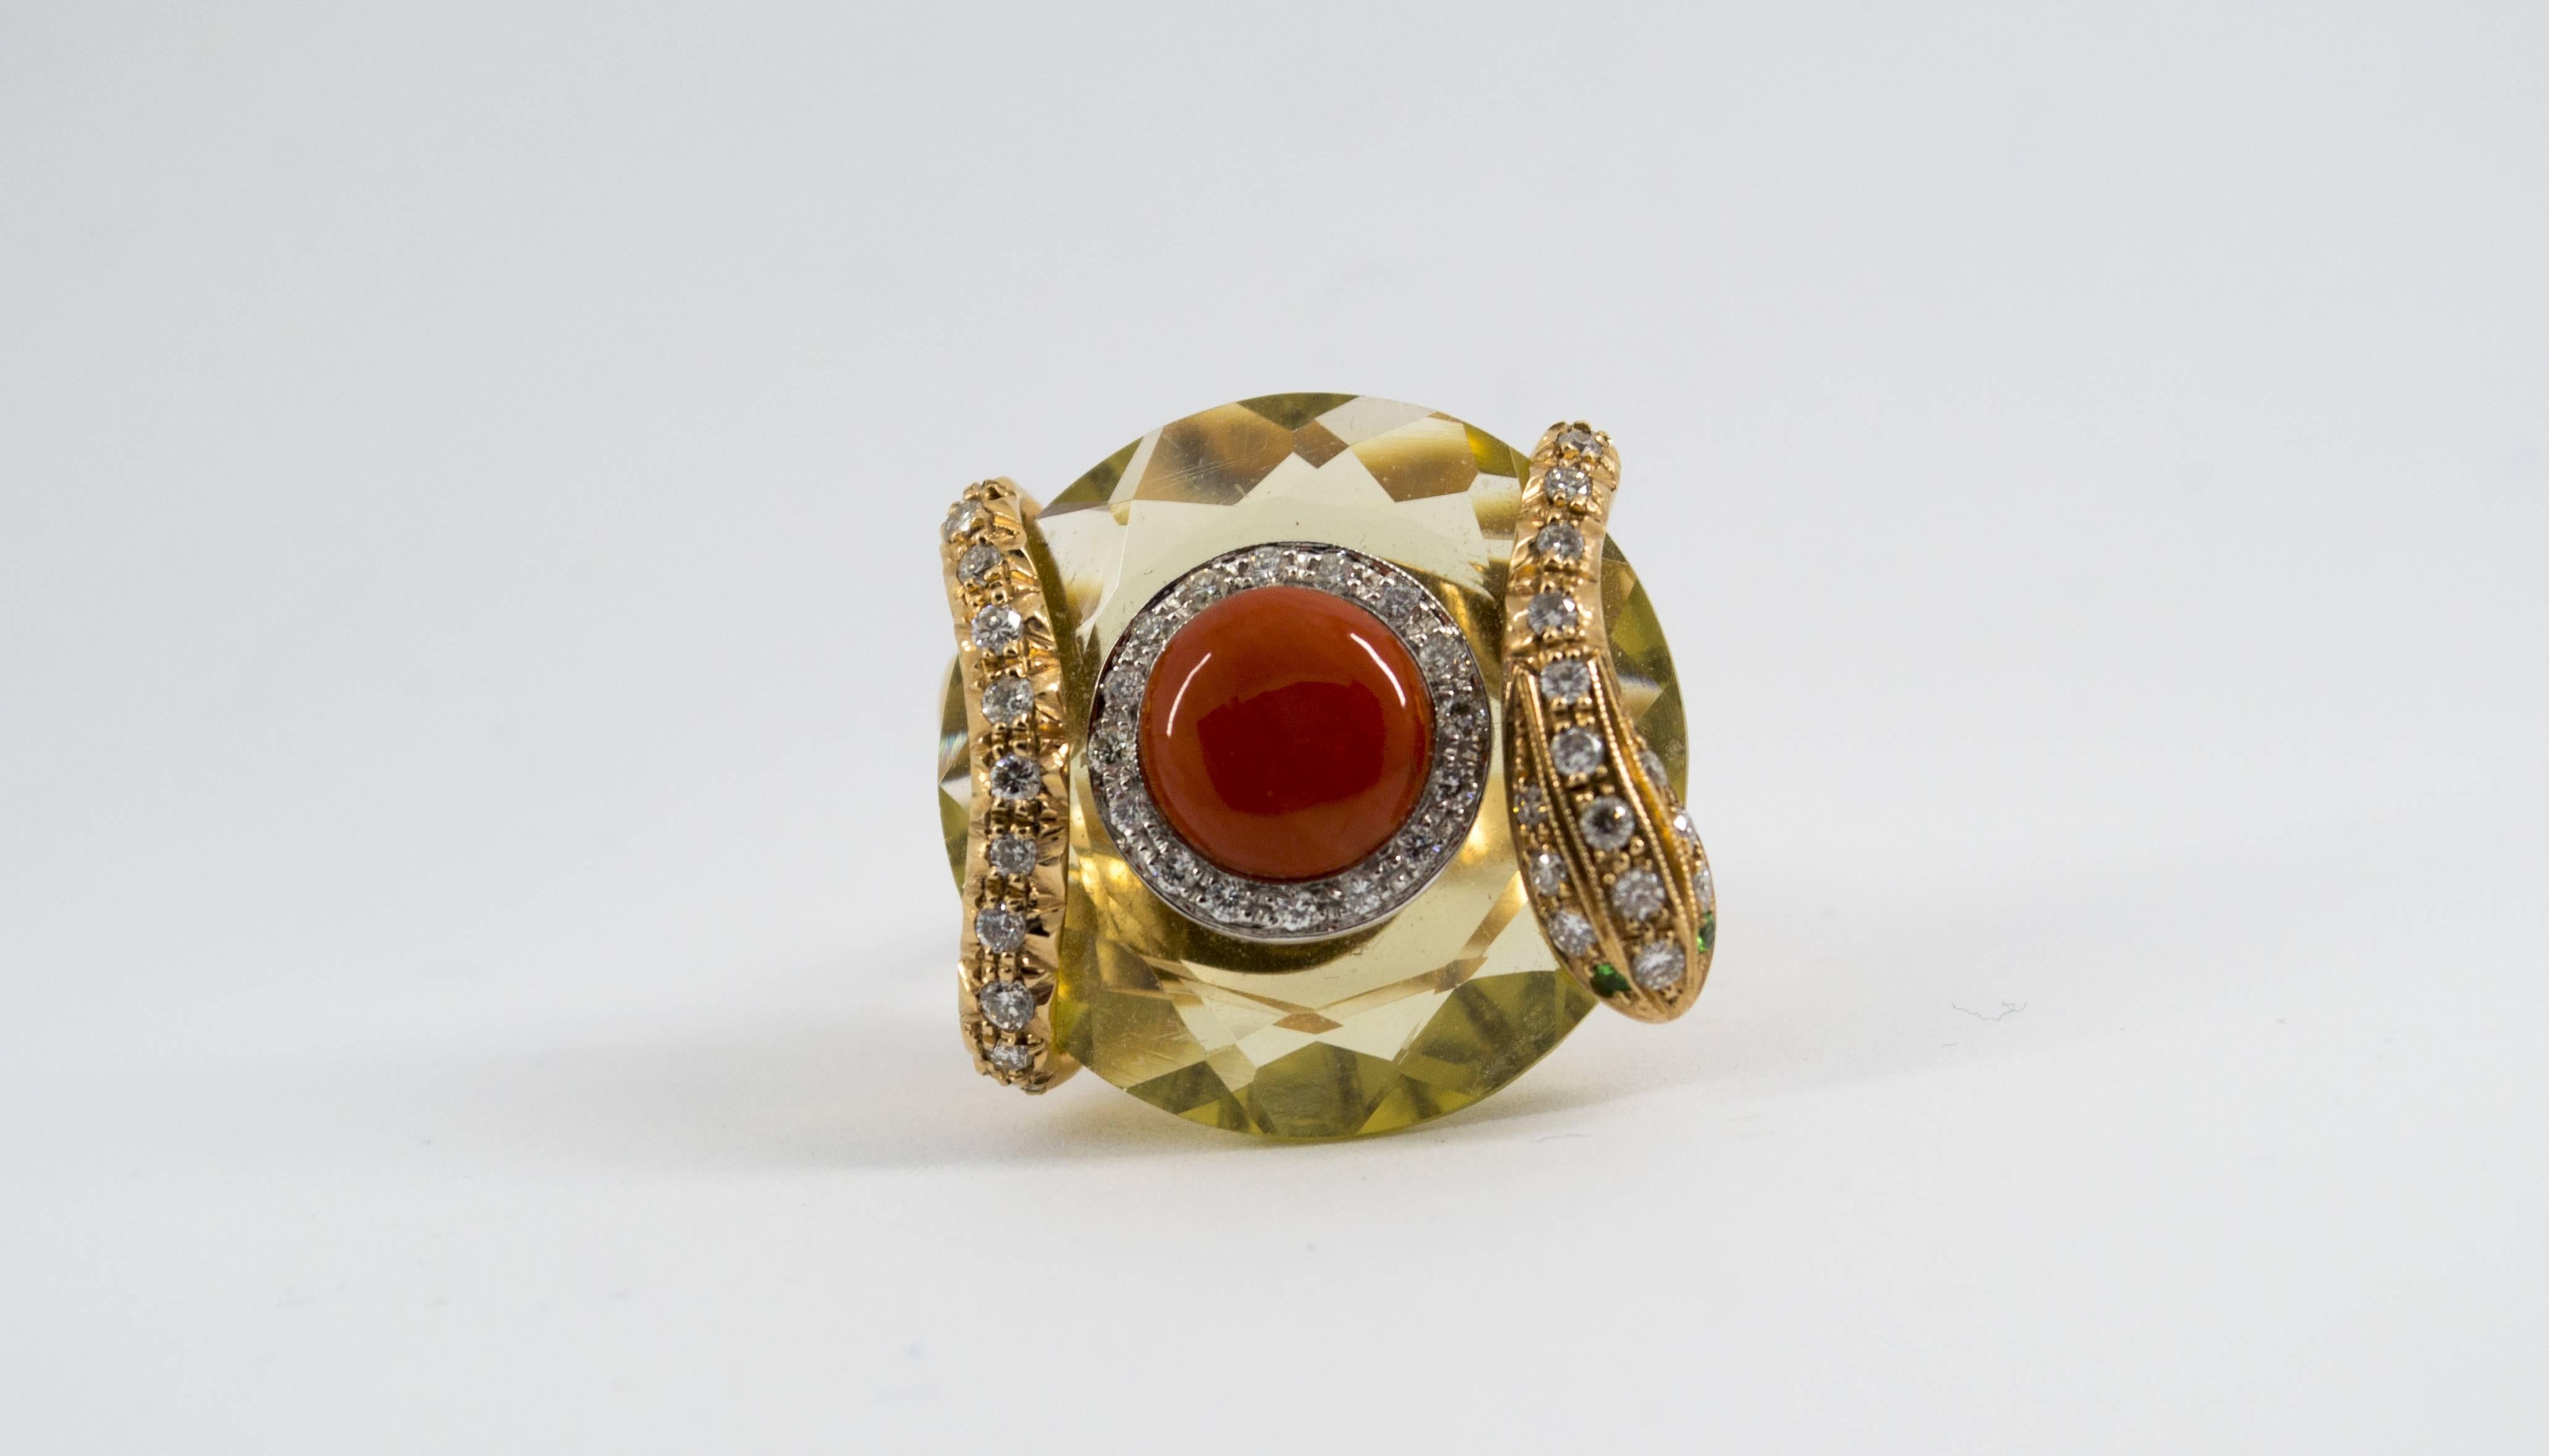 This Ring is made of 14K Yellow Gold.
This Ring has 0.60 Carats of Diamonds.
This Ring has a Red Mediterranean (Sardinia, Italy) Coral and a Citrine.
This Ring is inspired by Renaissance Style.
Size ITA: 14 USA: 7
We're a workshop so every piece is